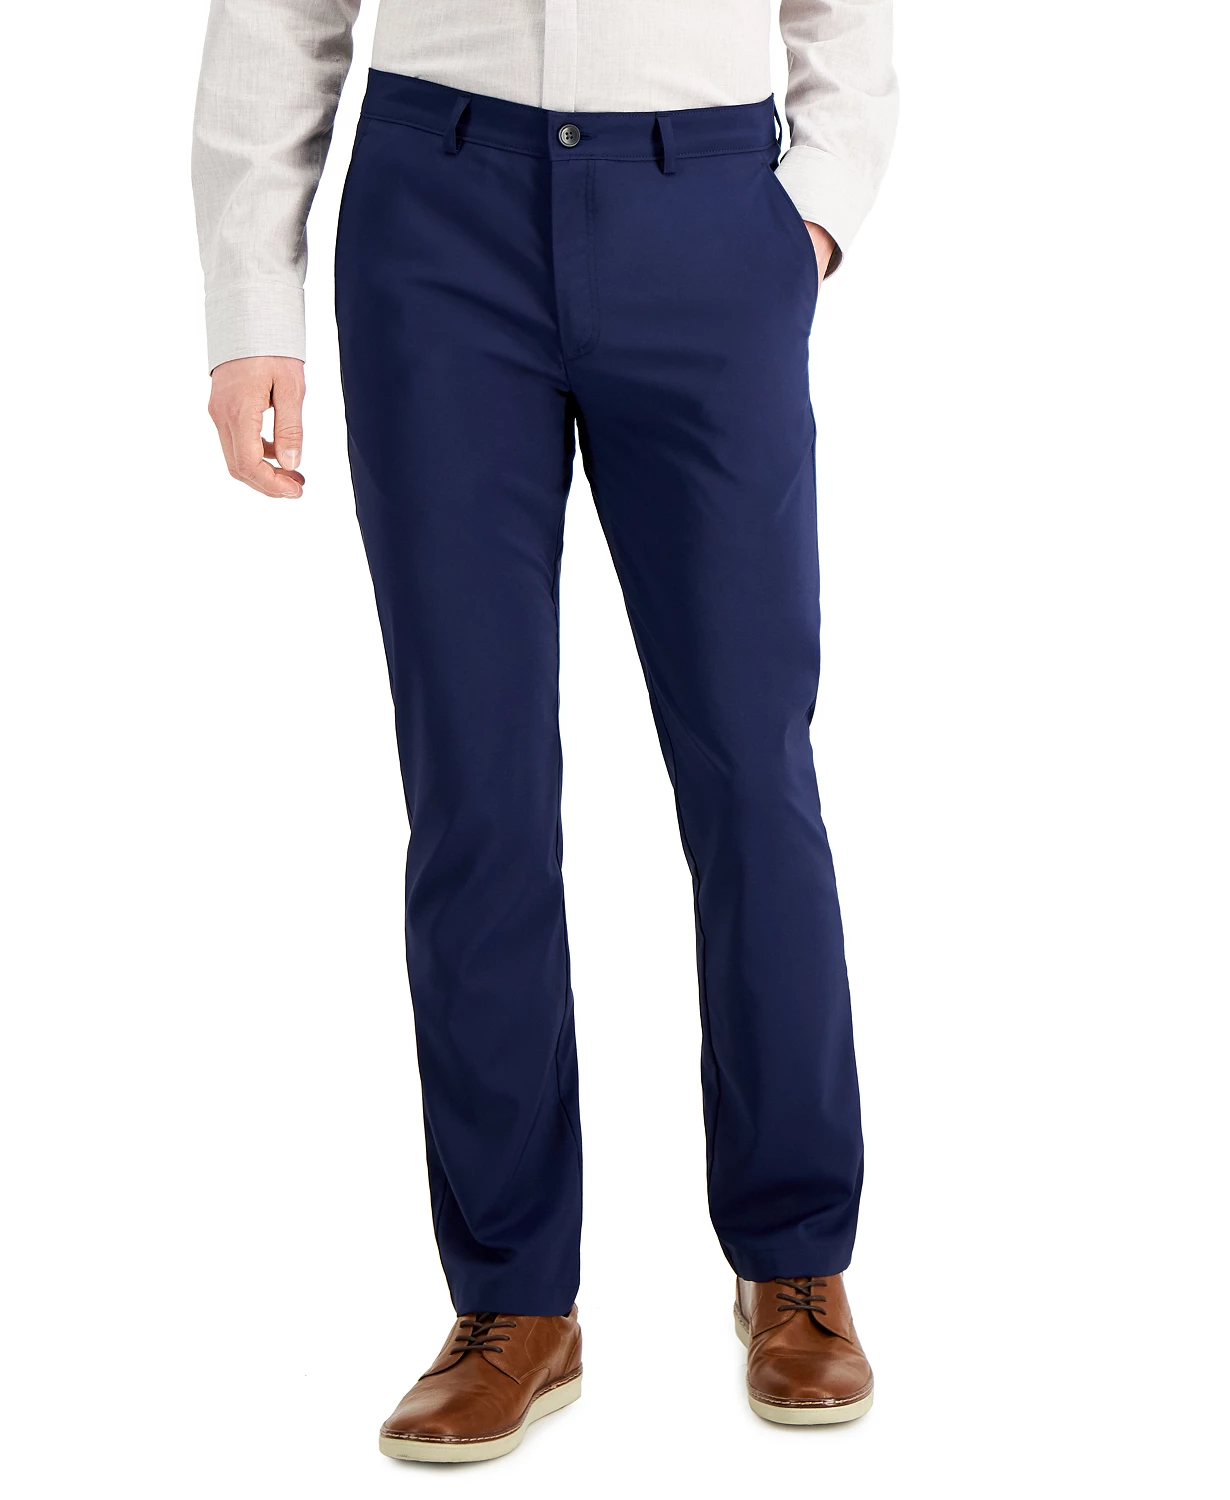 Macy’s: Men’s Clearance Apparel Up to 85% off